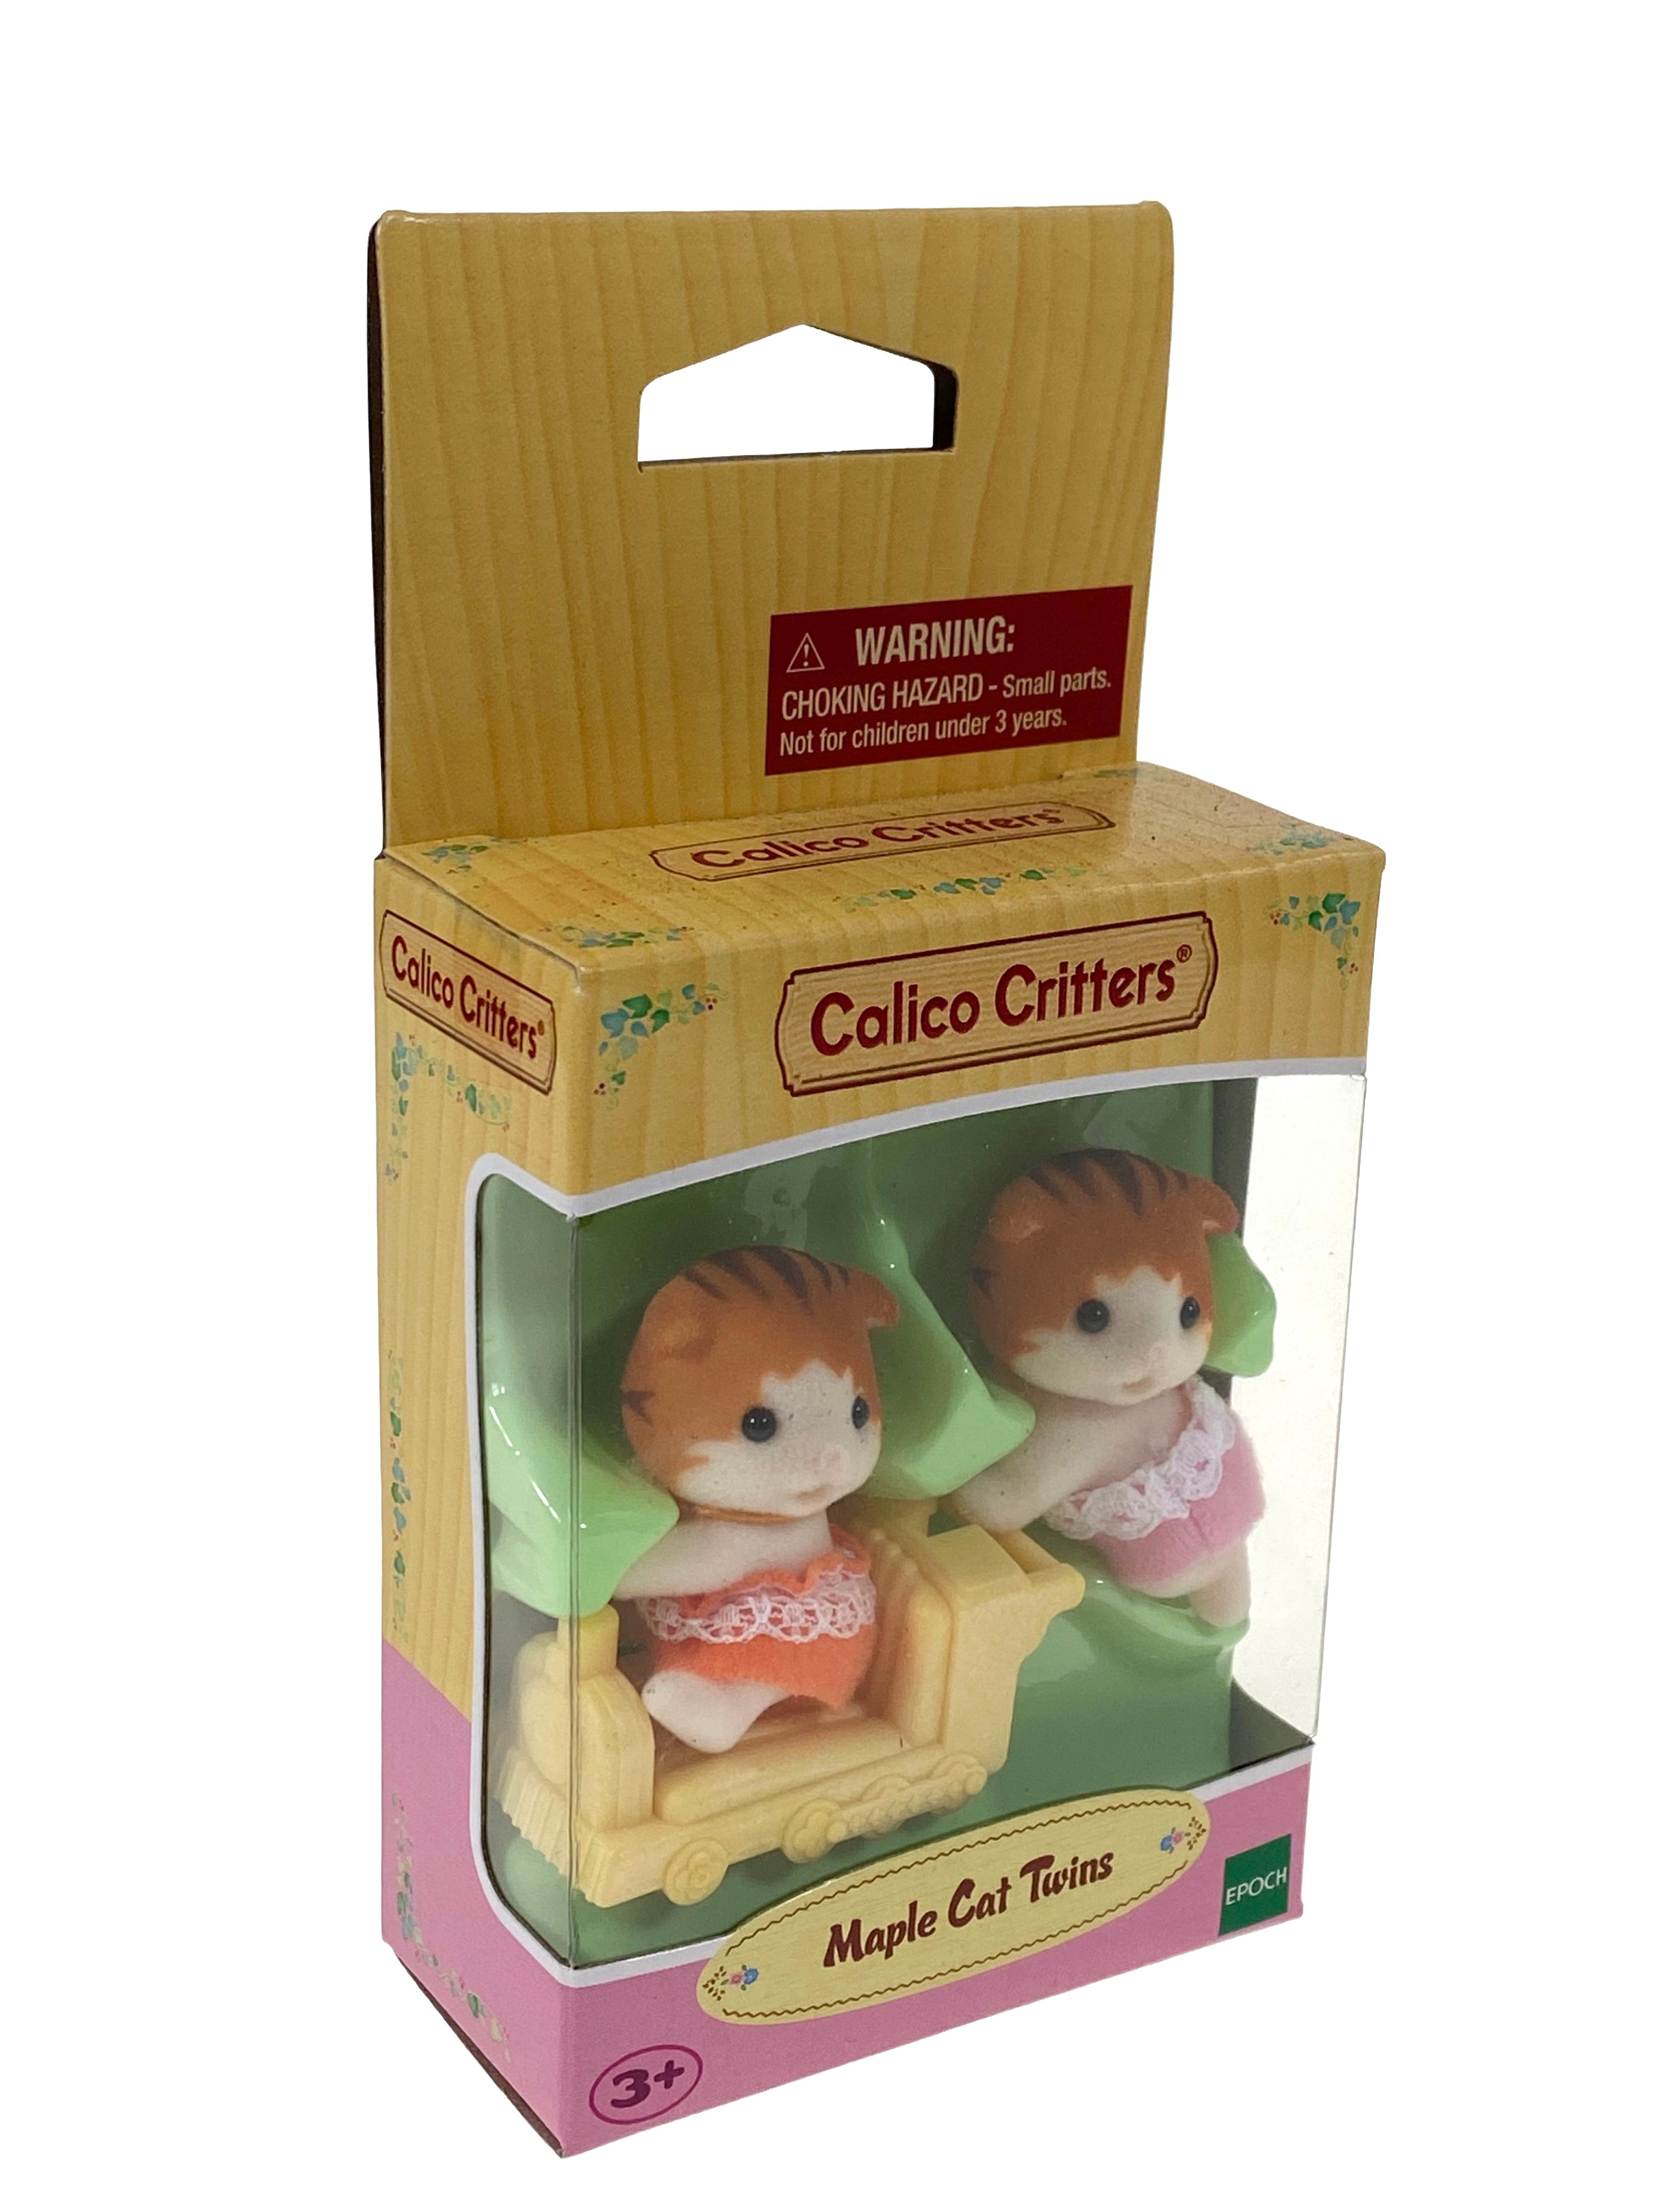 Calico Critters Maple Cat Twins    